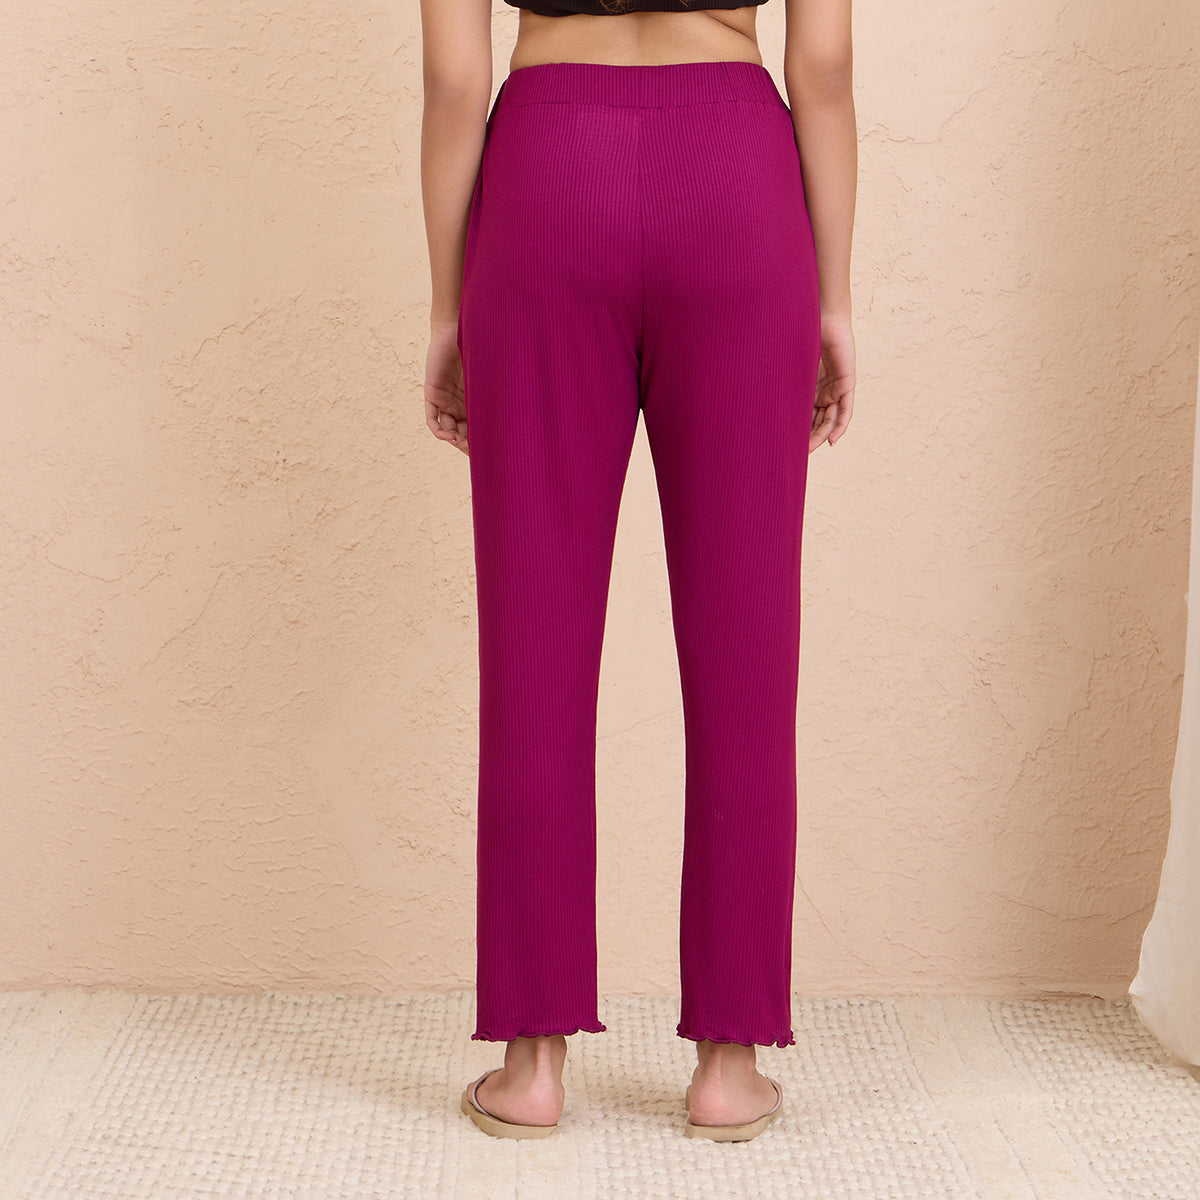 Nykd By Nykaa Summer Essential Soft and Comfy Breathable Rib Lounge Pajama-NYS909-Wine